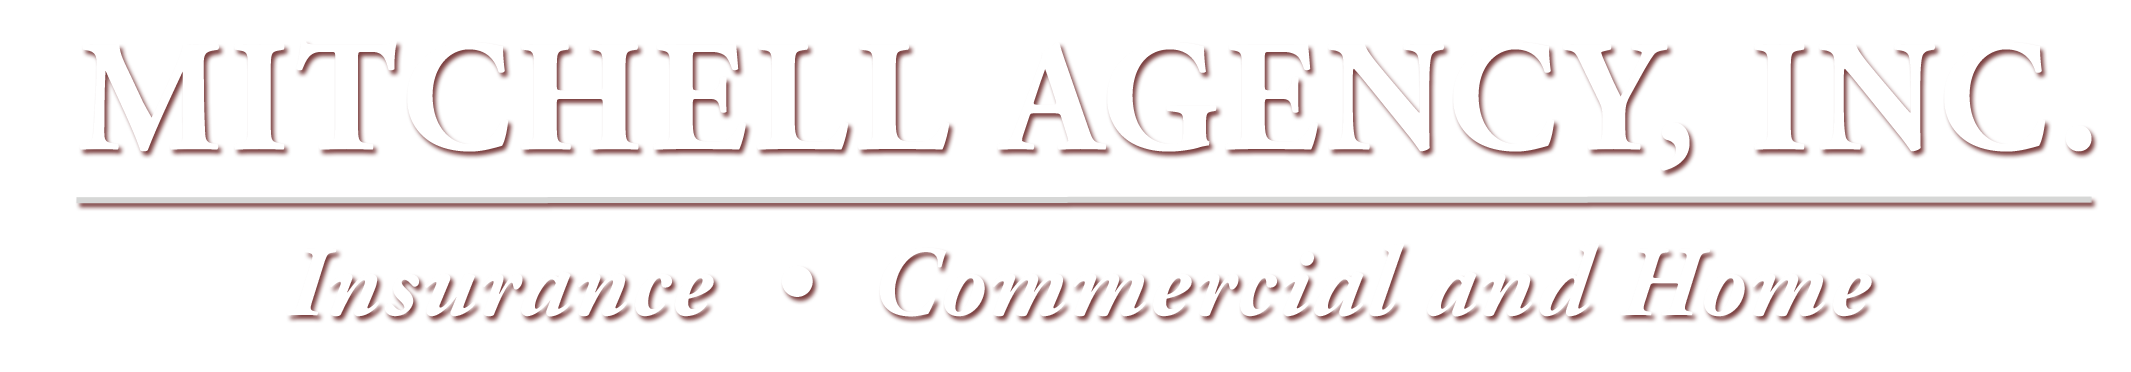 Mitchell Agency Inc. Insurance, Home and Commercial